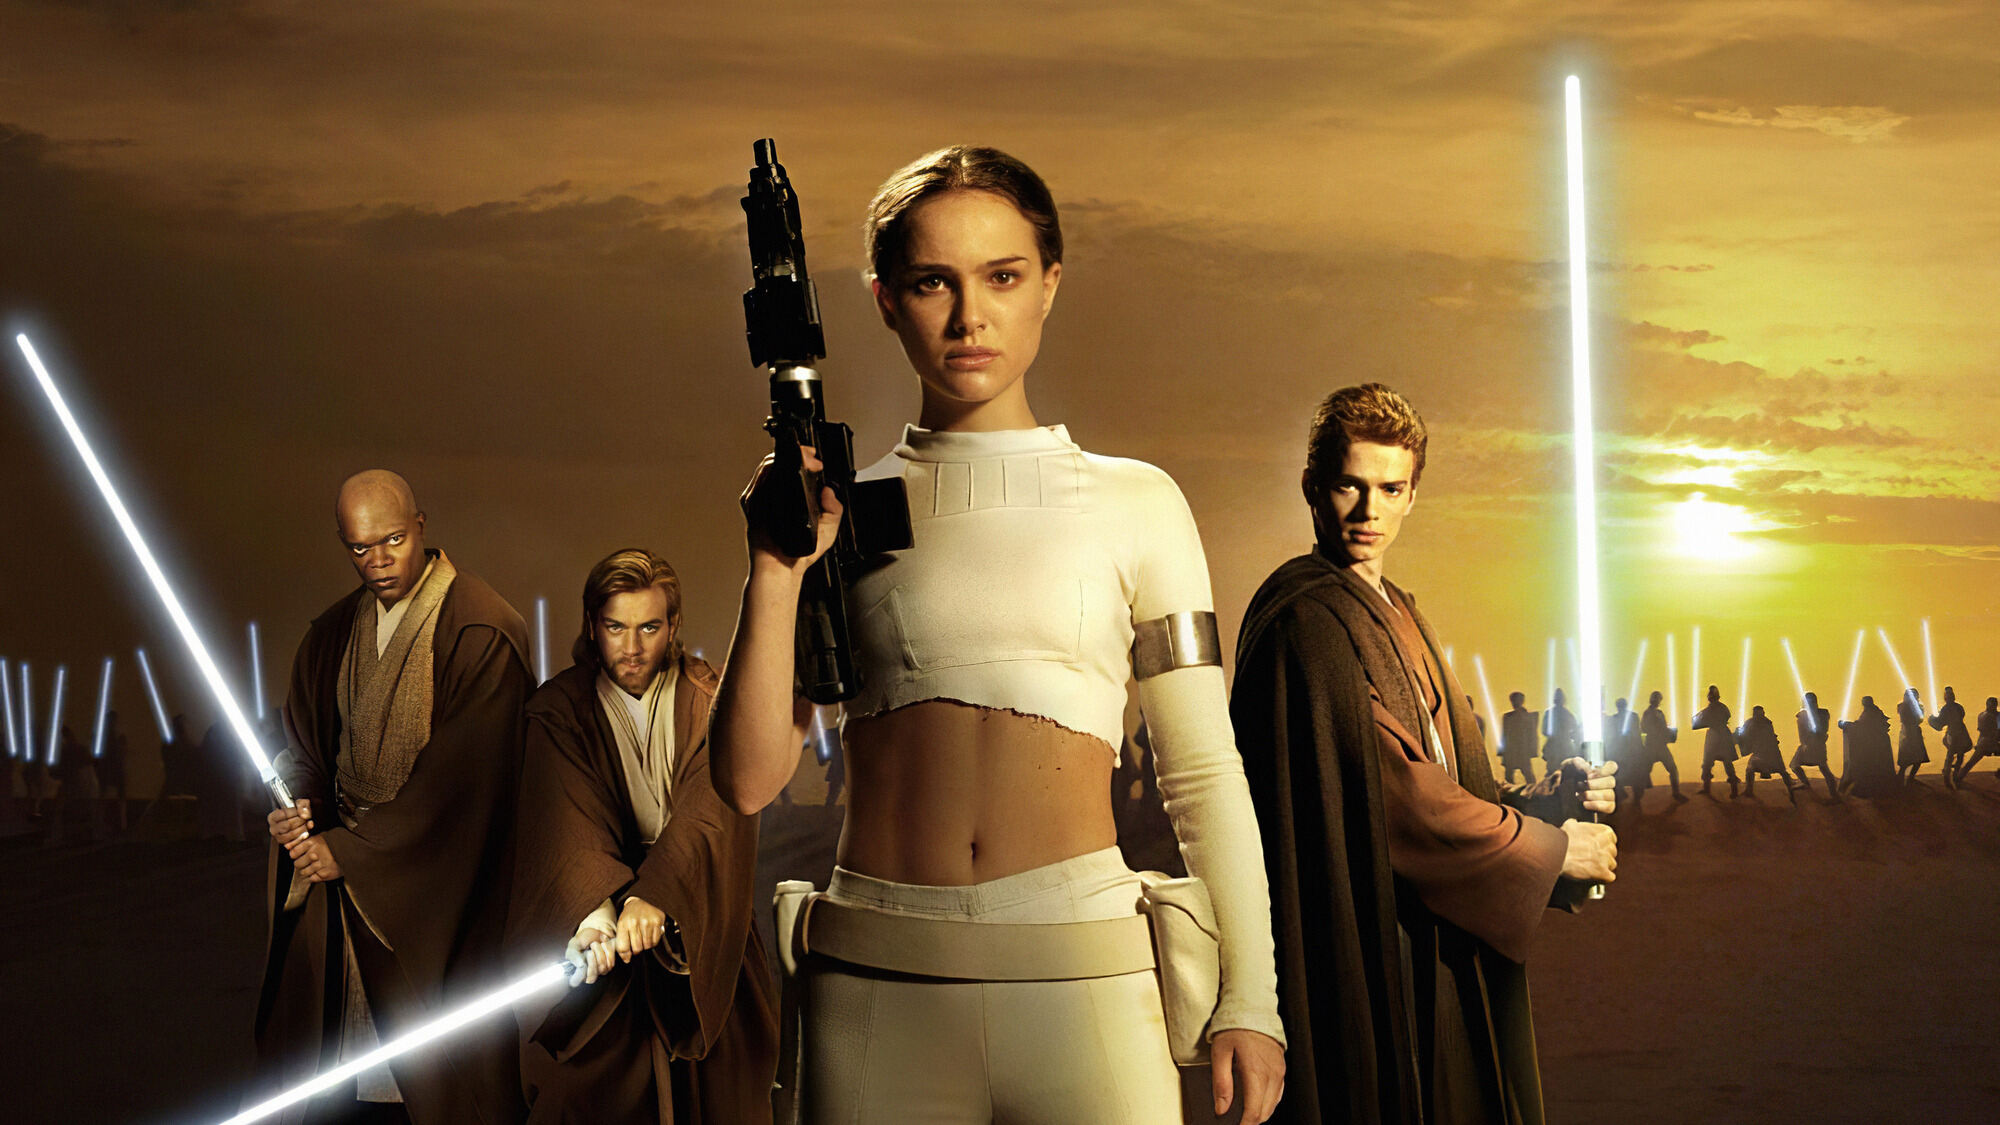 40-facts-about-the-movie-star-wars-episode-ii-attack-of-the-clones